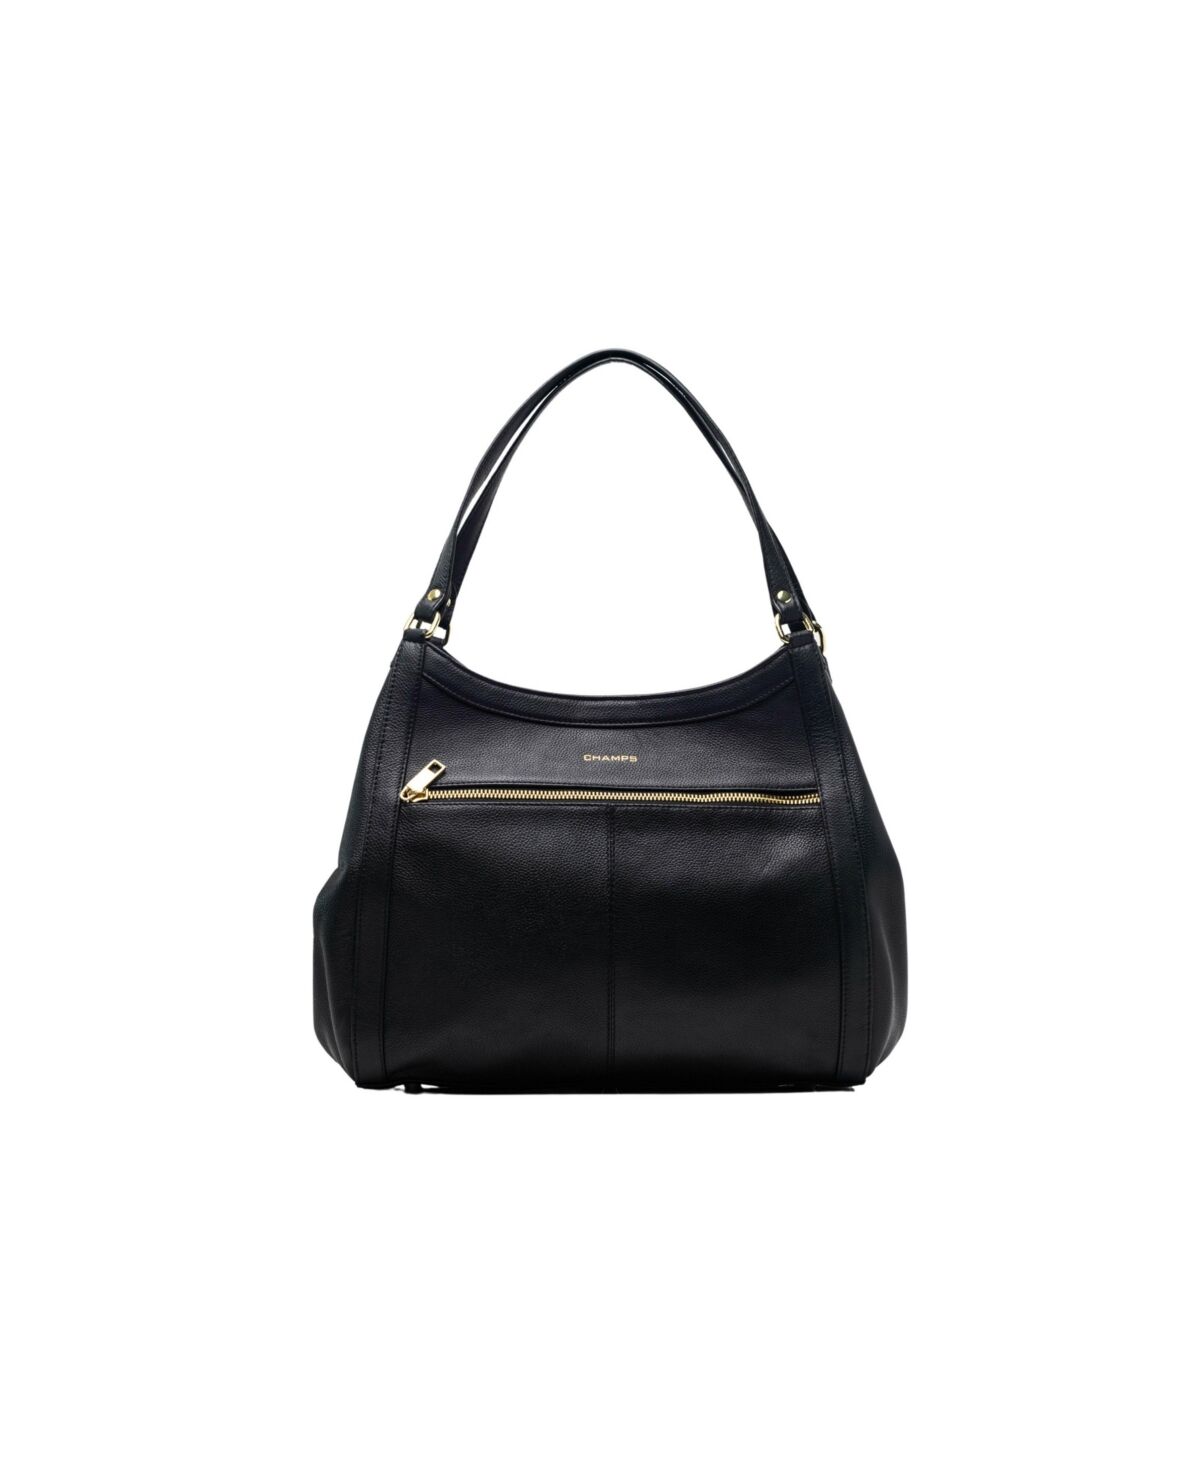 Champs Ladies Leather Hobo Bag from the Gala Collection - Black